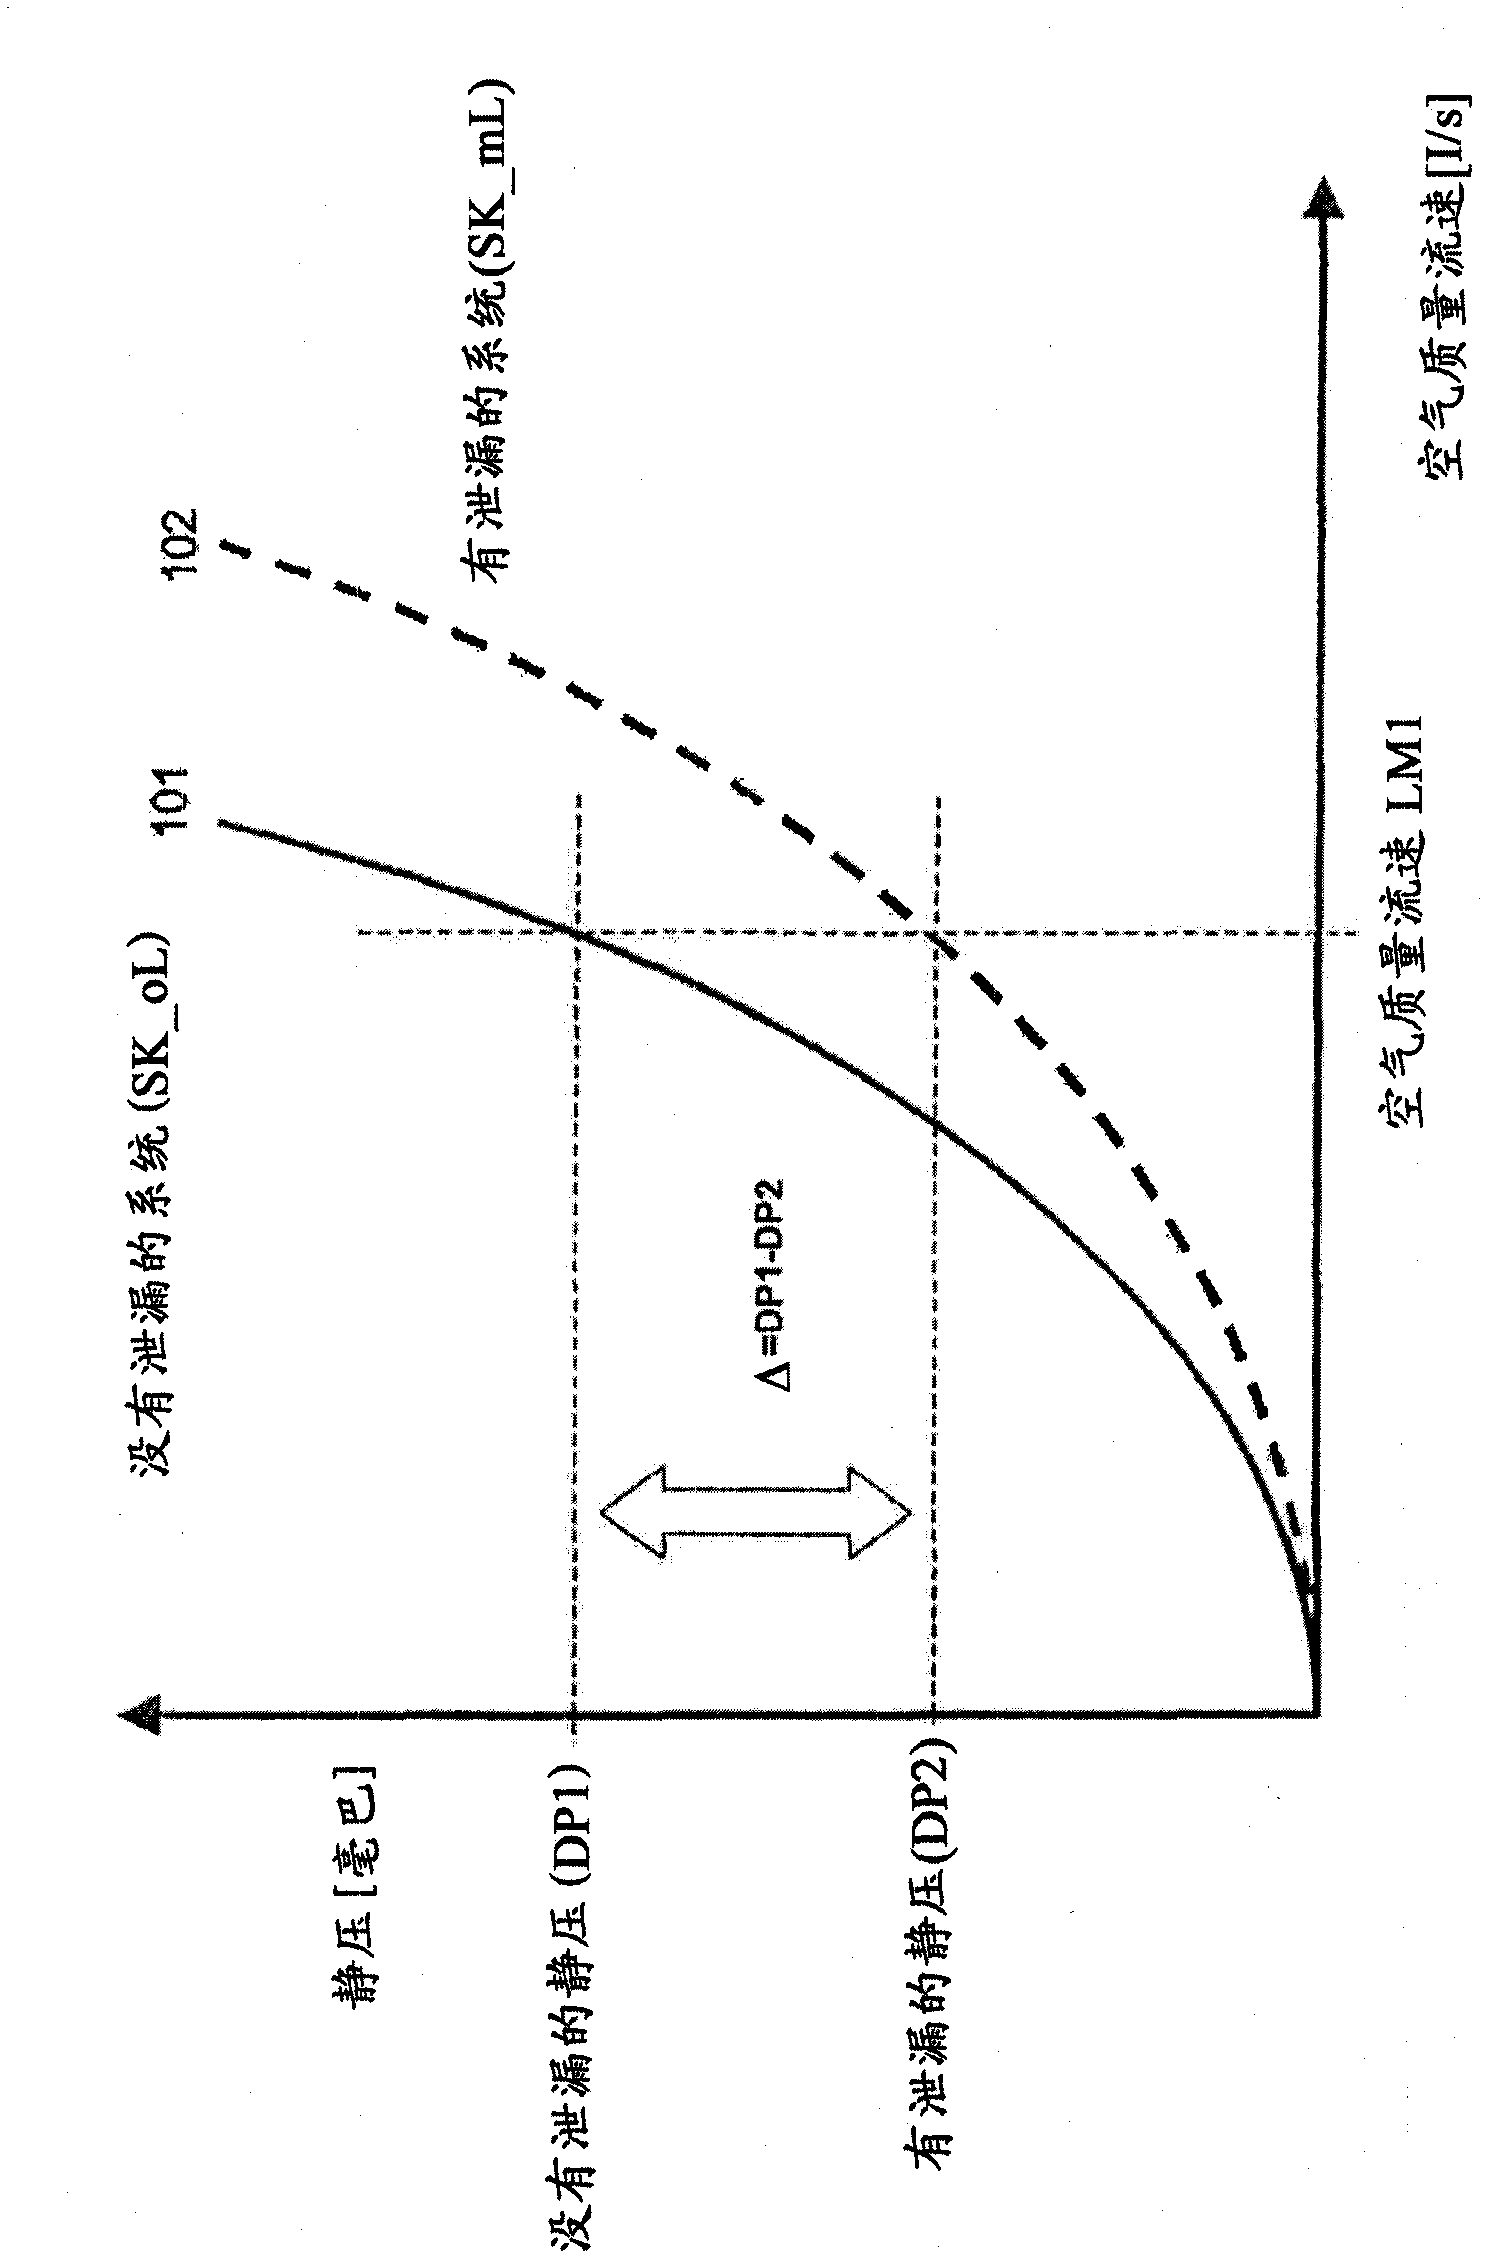 Aircraft conduit monitoring system and method